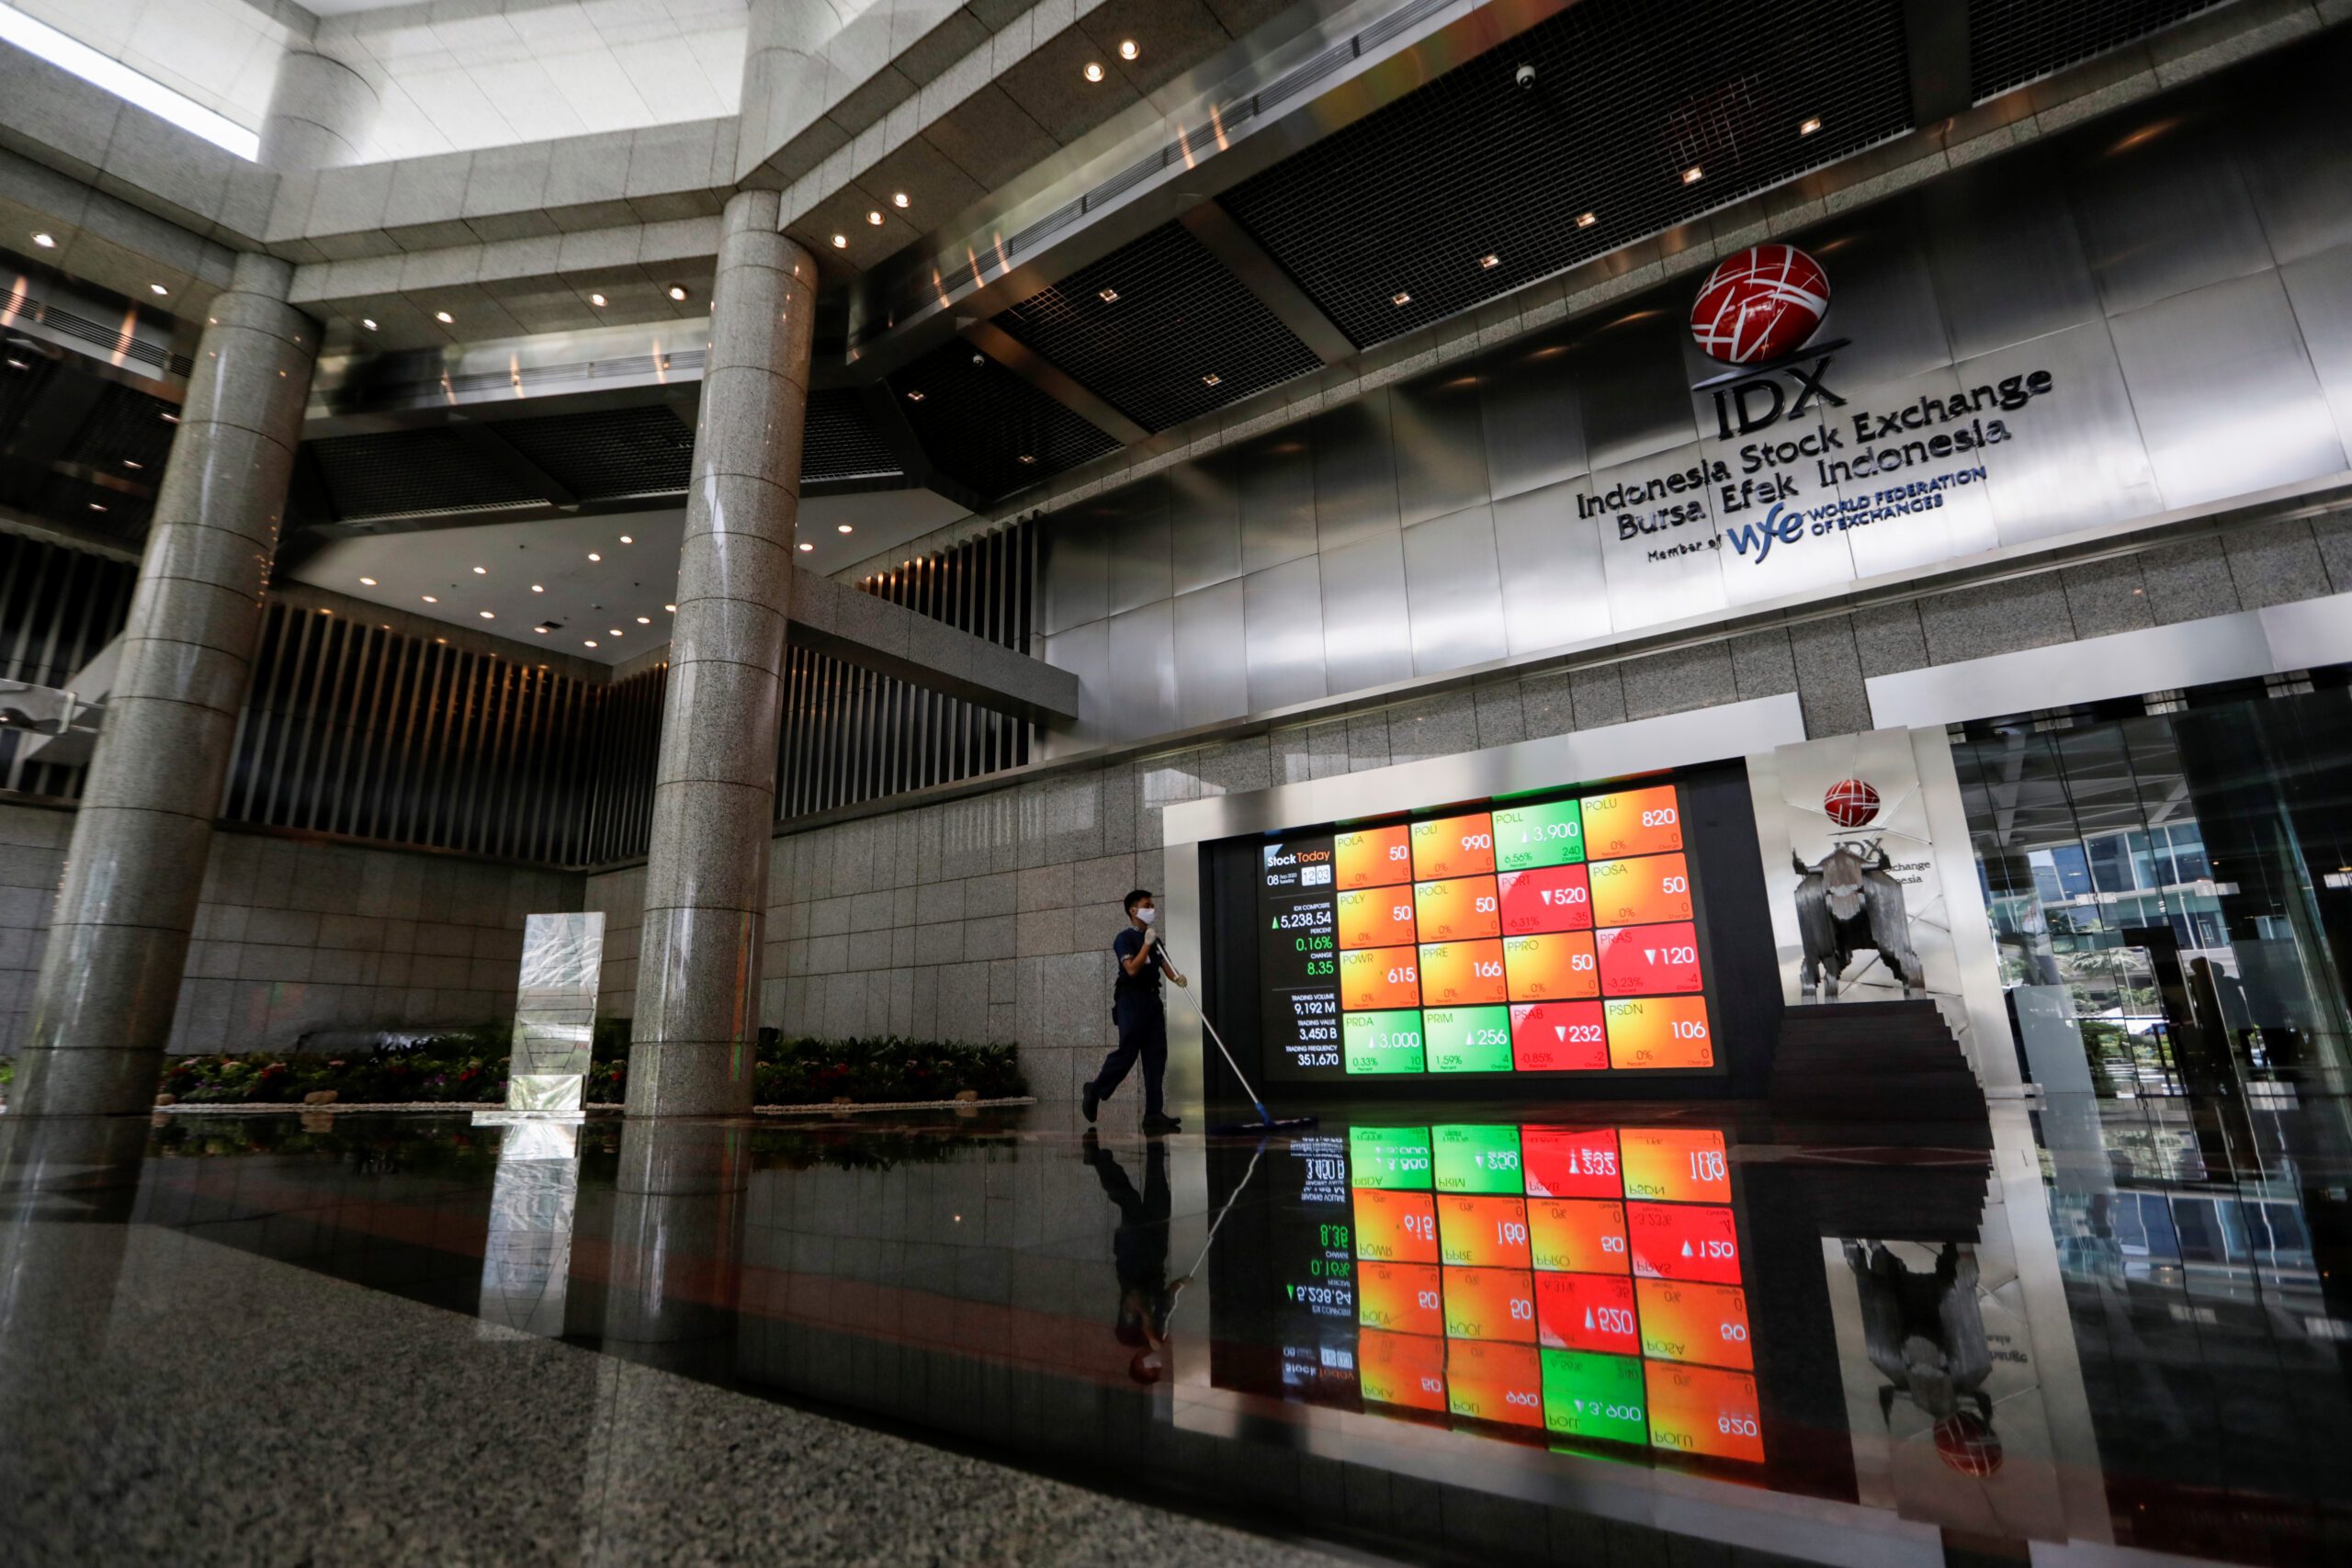 Smaller firms rush to list on IDX ahead of Indonesia's election season